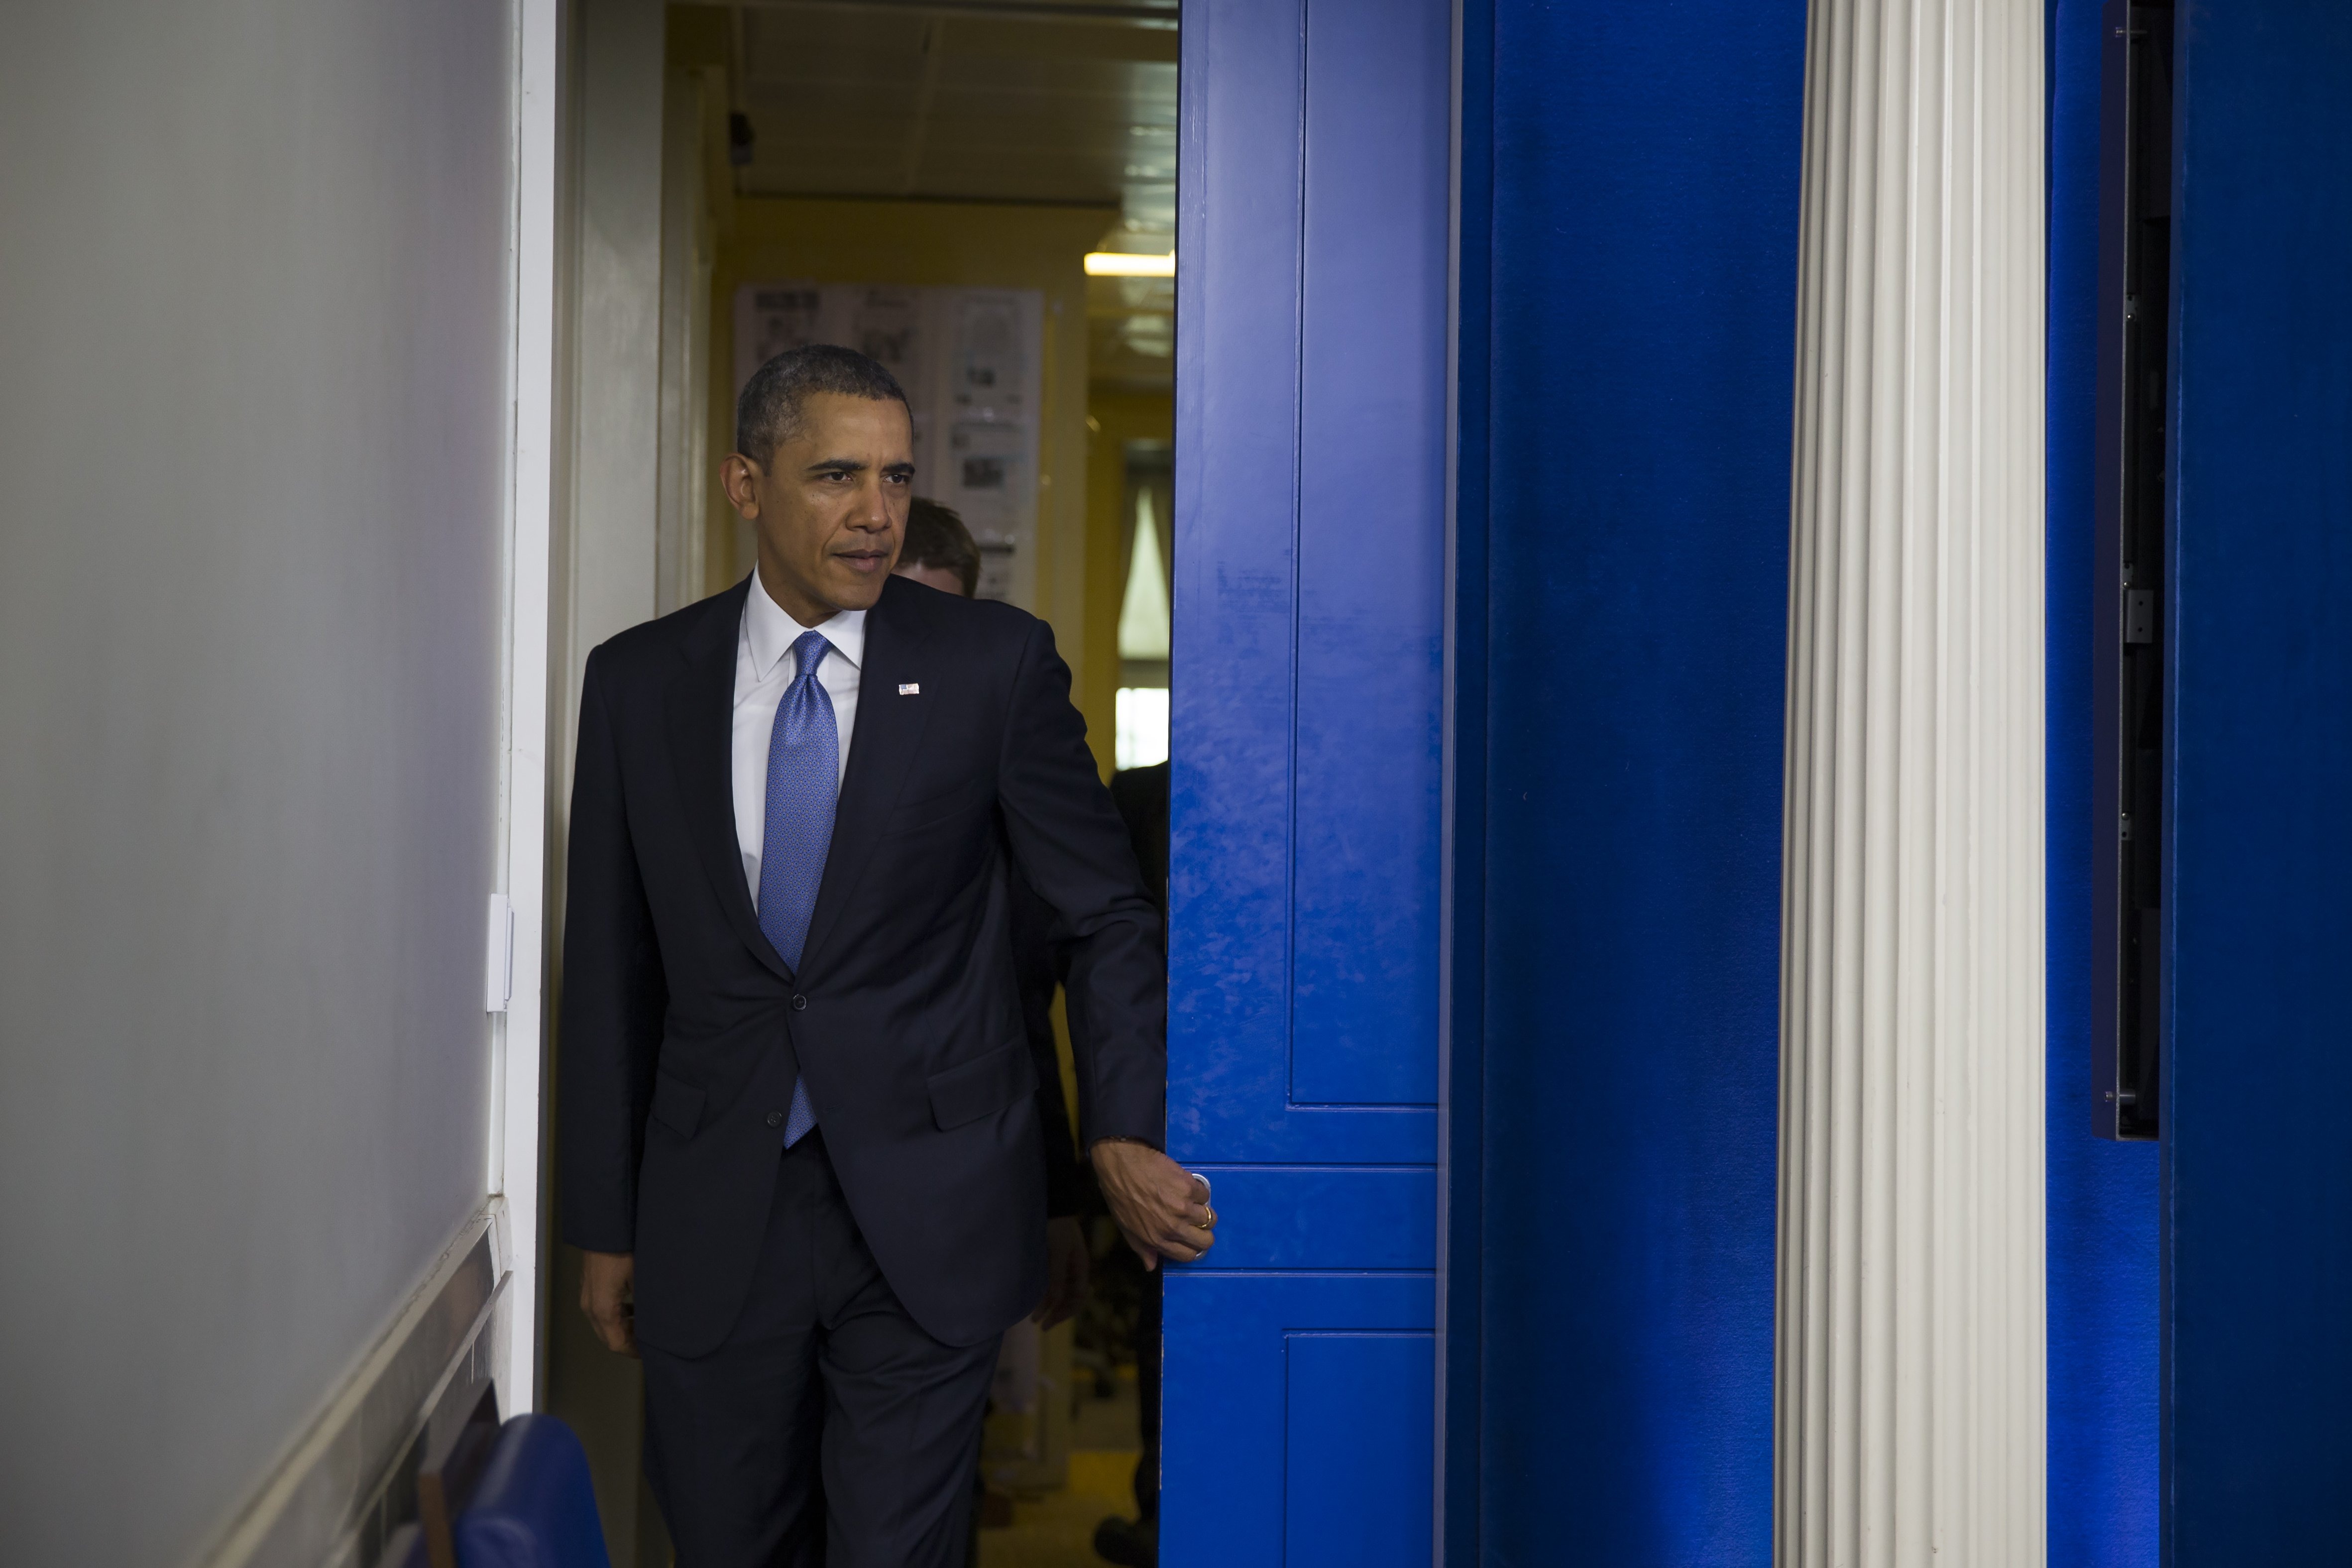 President Barack Obama arrives to deliver a statement on Ukraine from the White House in Washington